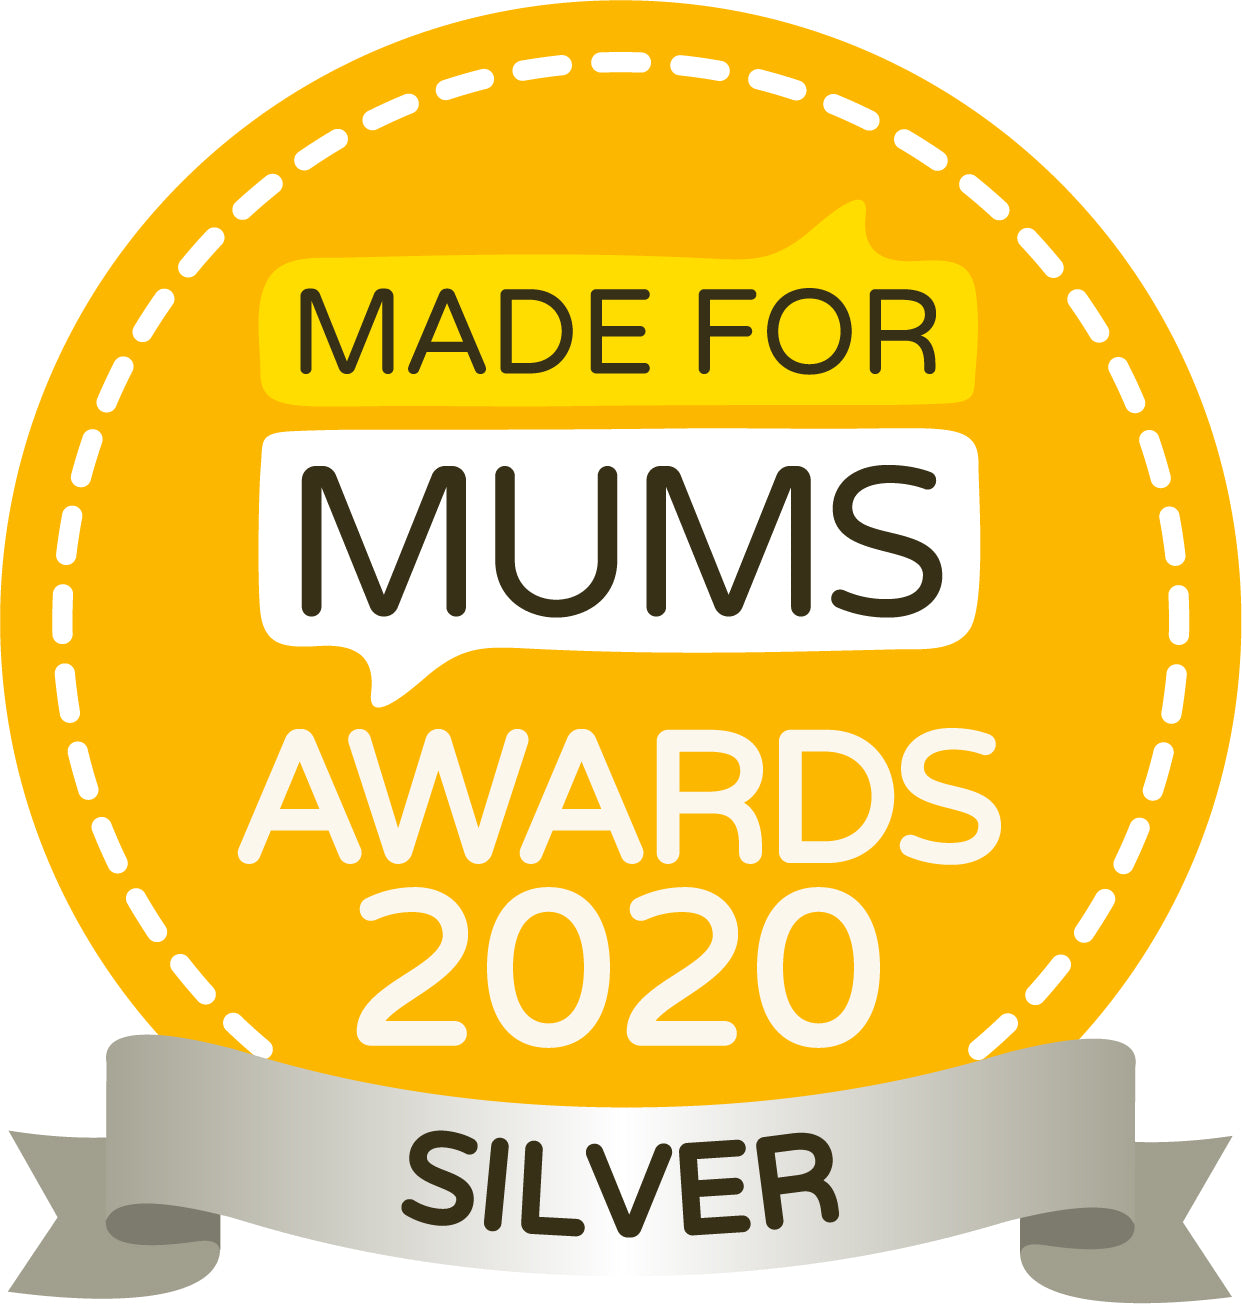 Made for mums awards 2020 silver badge featuring Bulgarian Rose from Alteya.